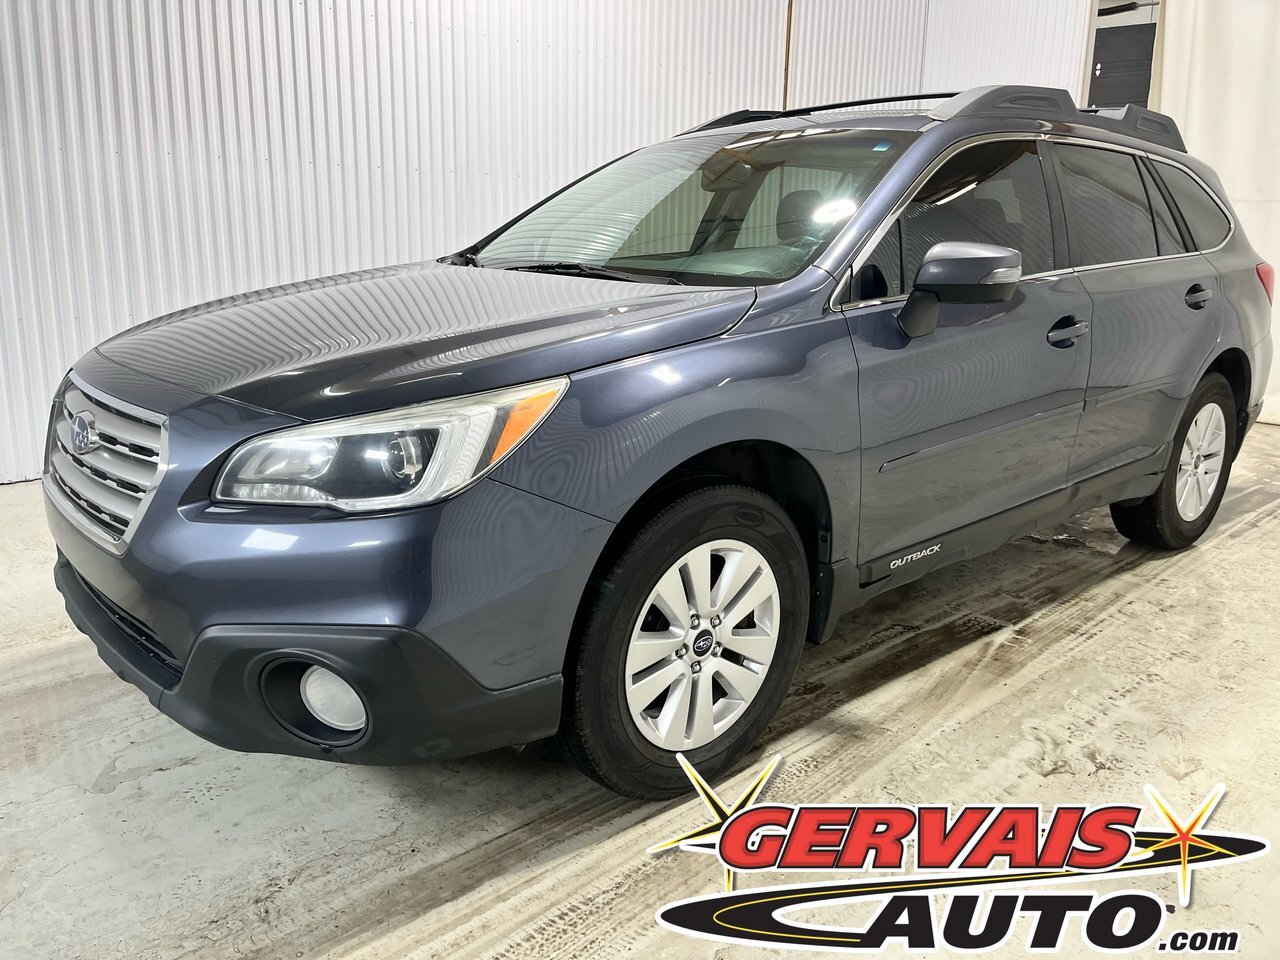 2017 Subaru Outback Touring AWD Toit Ouvrant Sièges Chauffants Mags